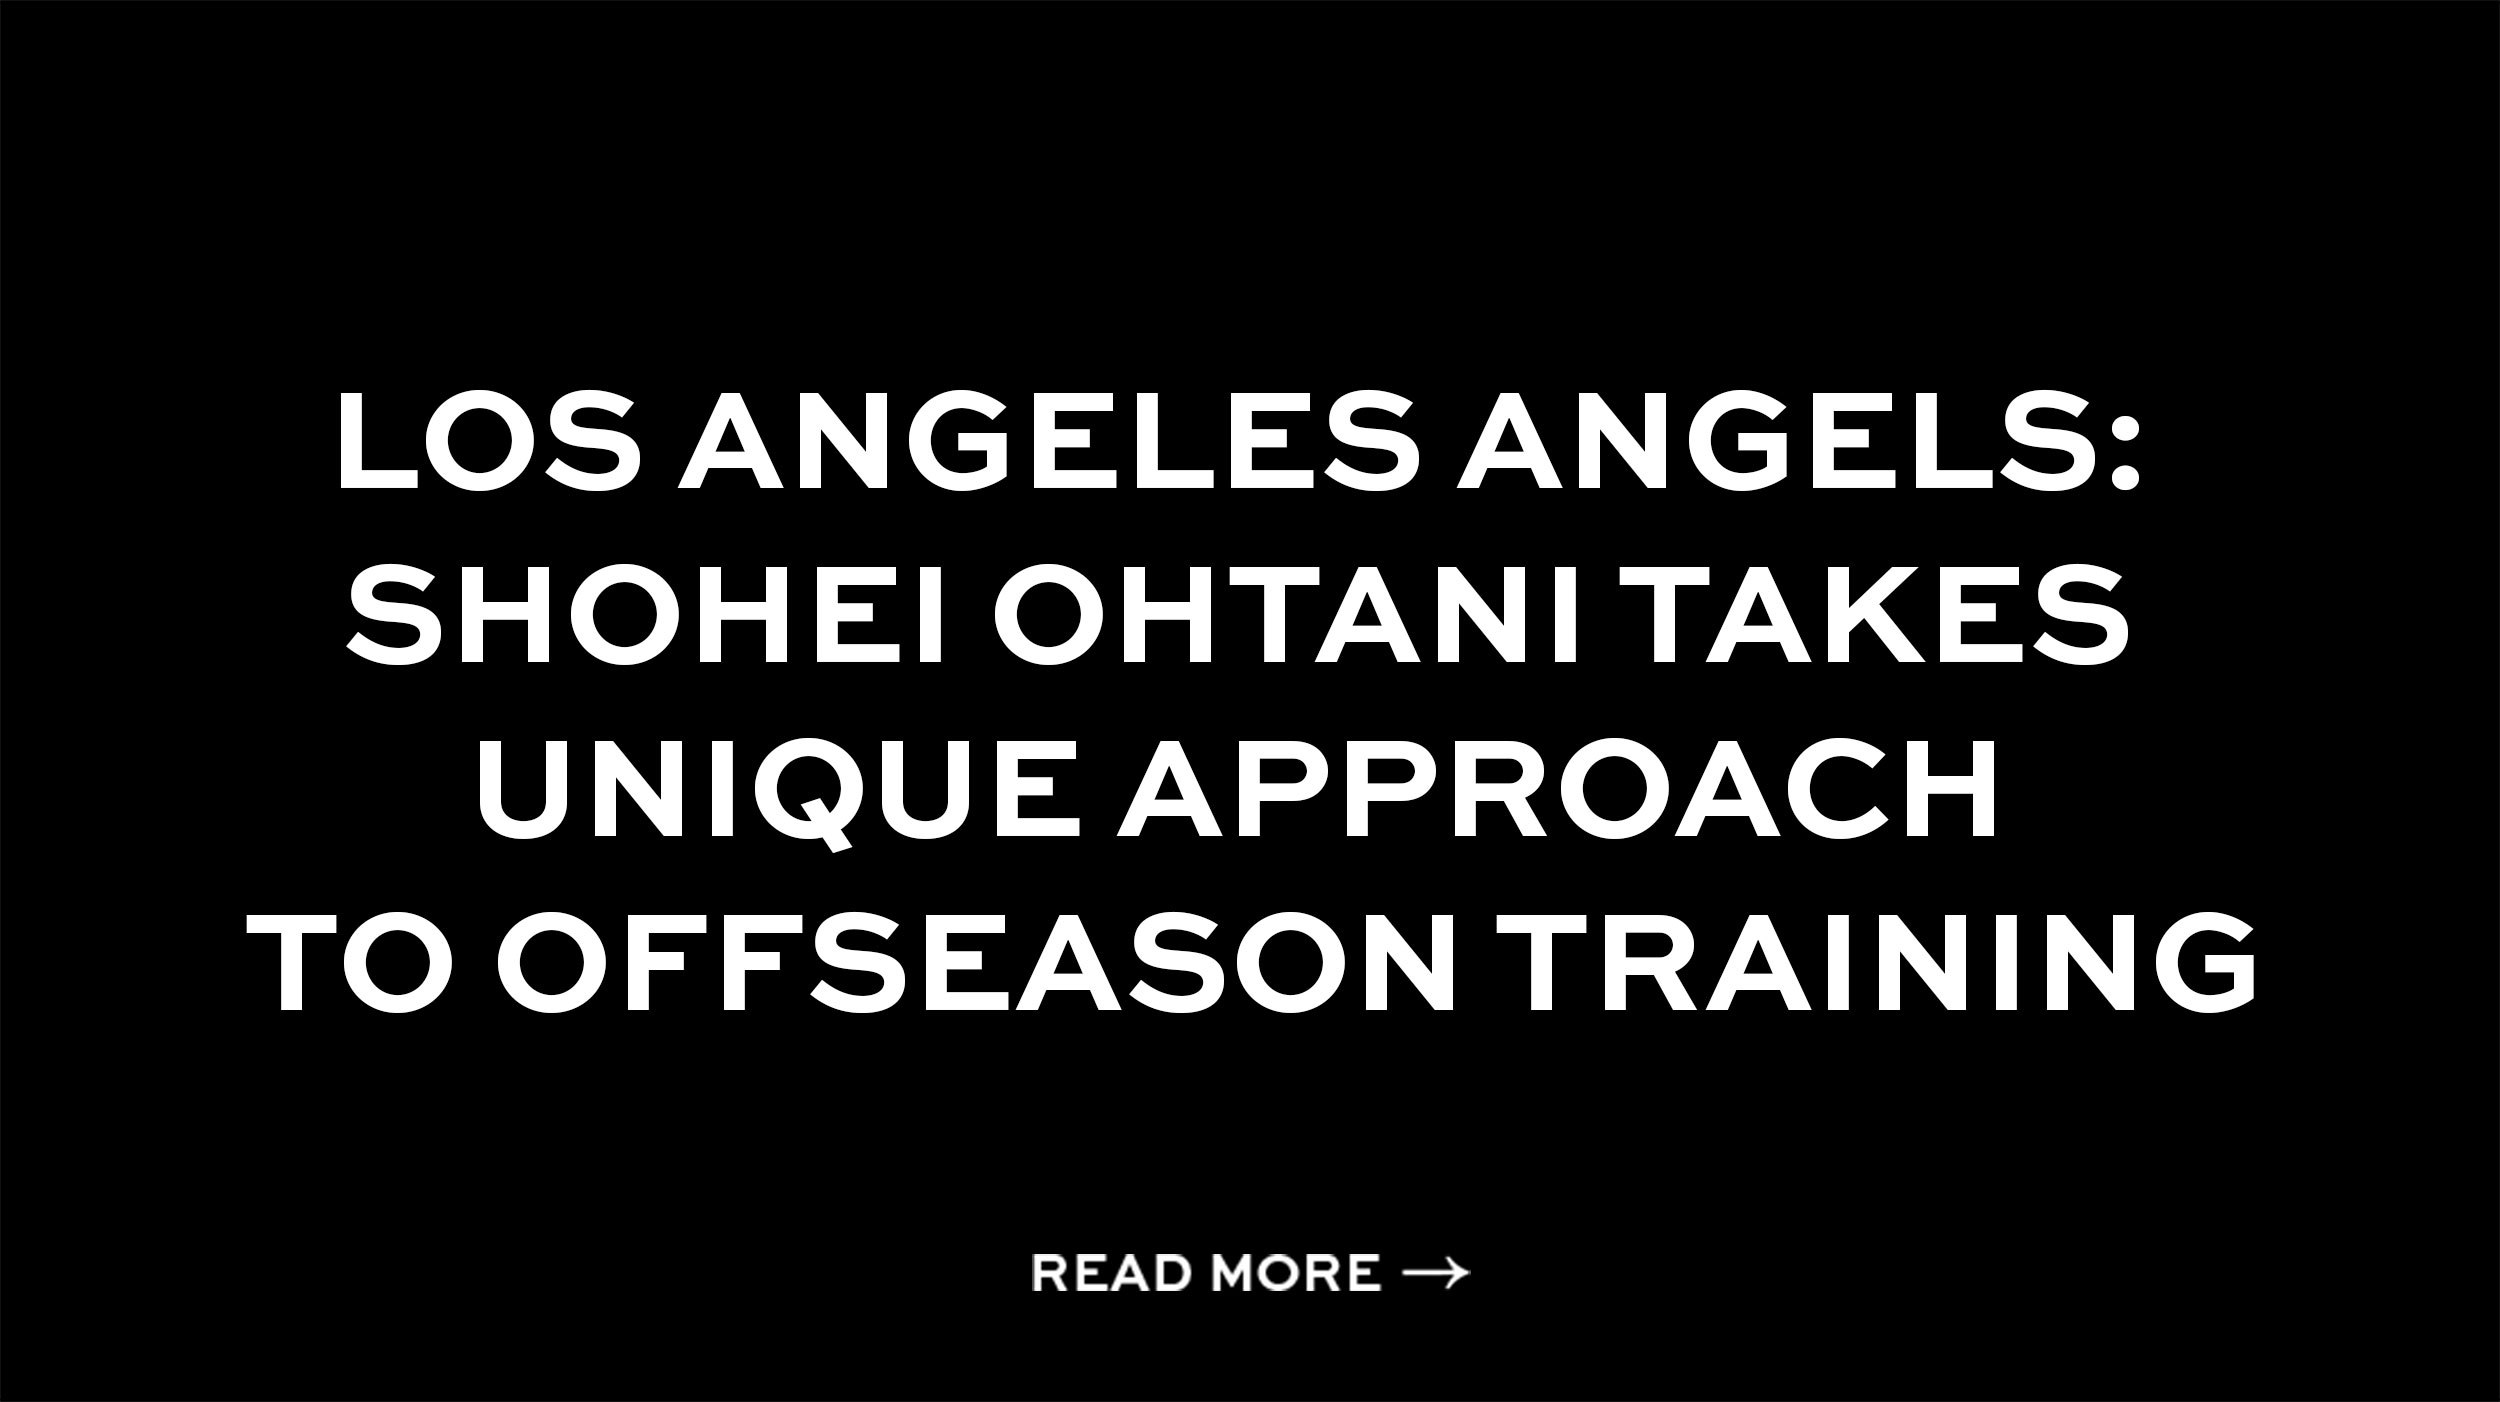 Los Angeles Angels: Shohei Ohtani takes unique approach to offseason training